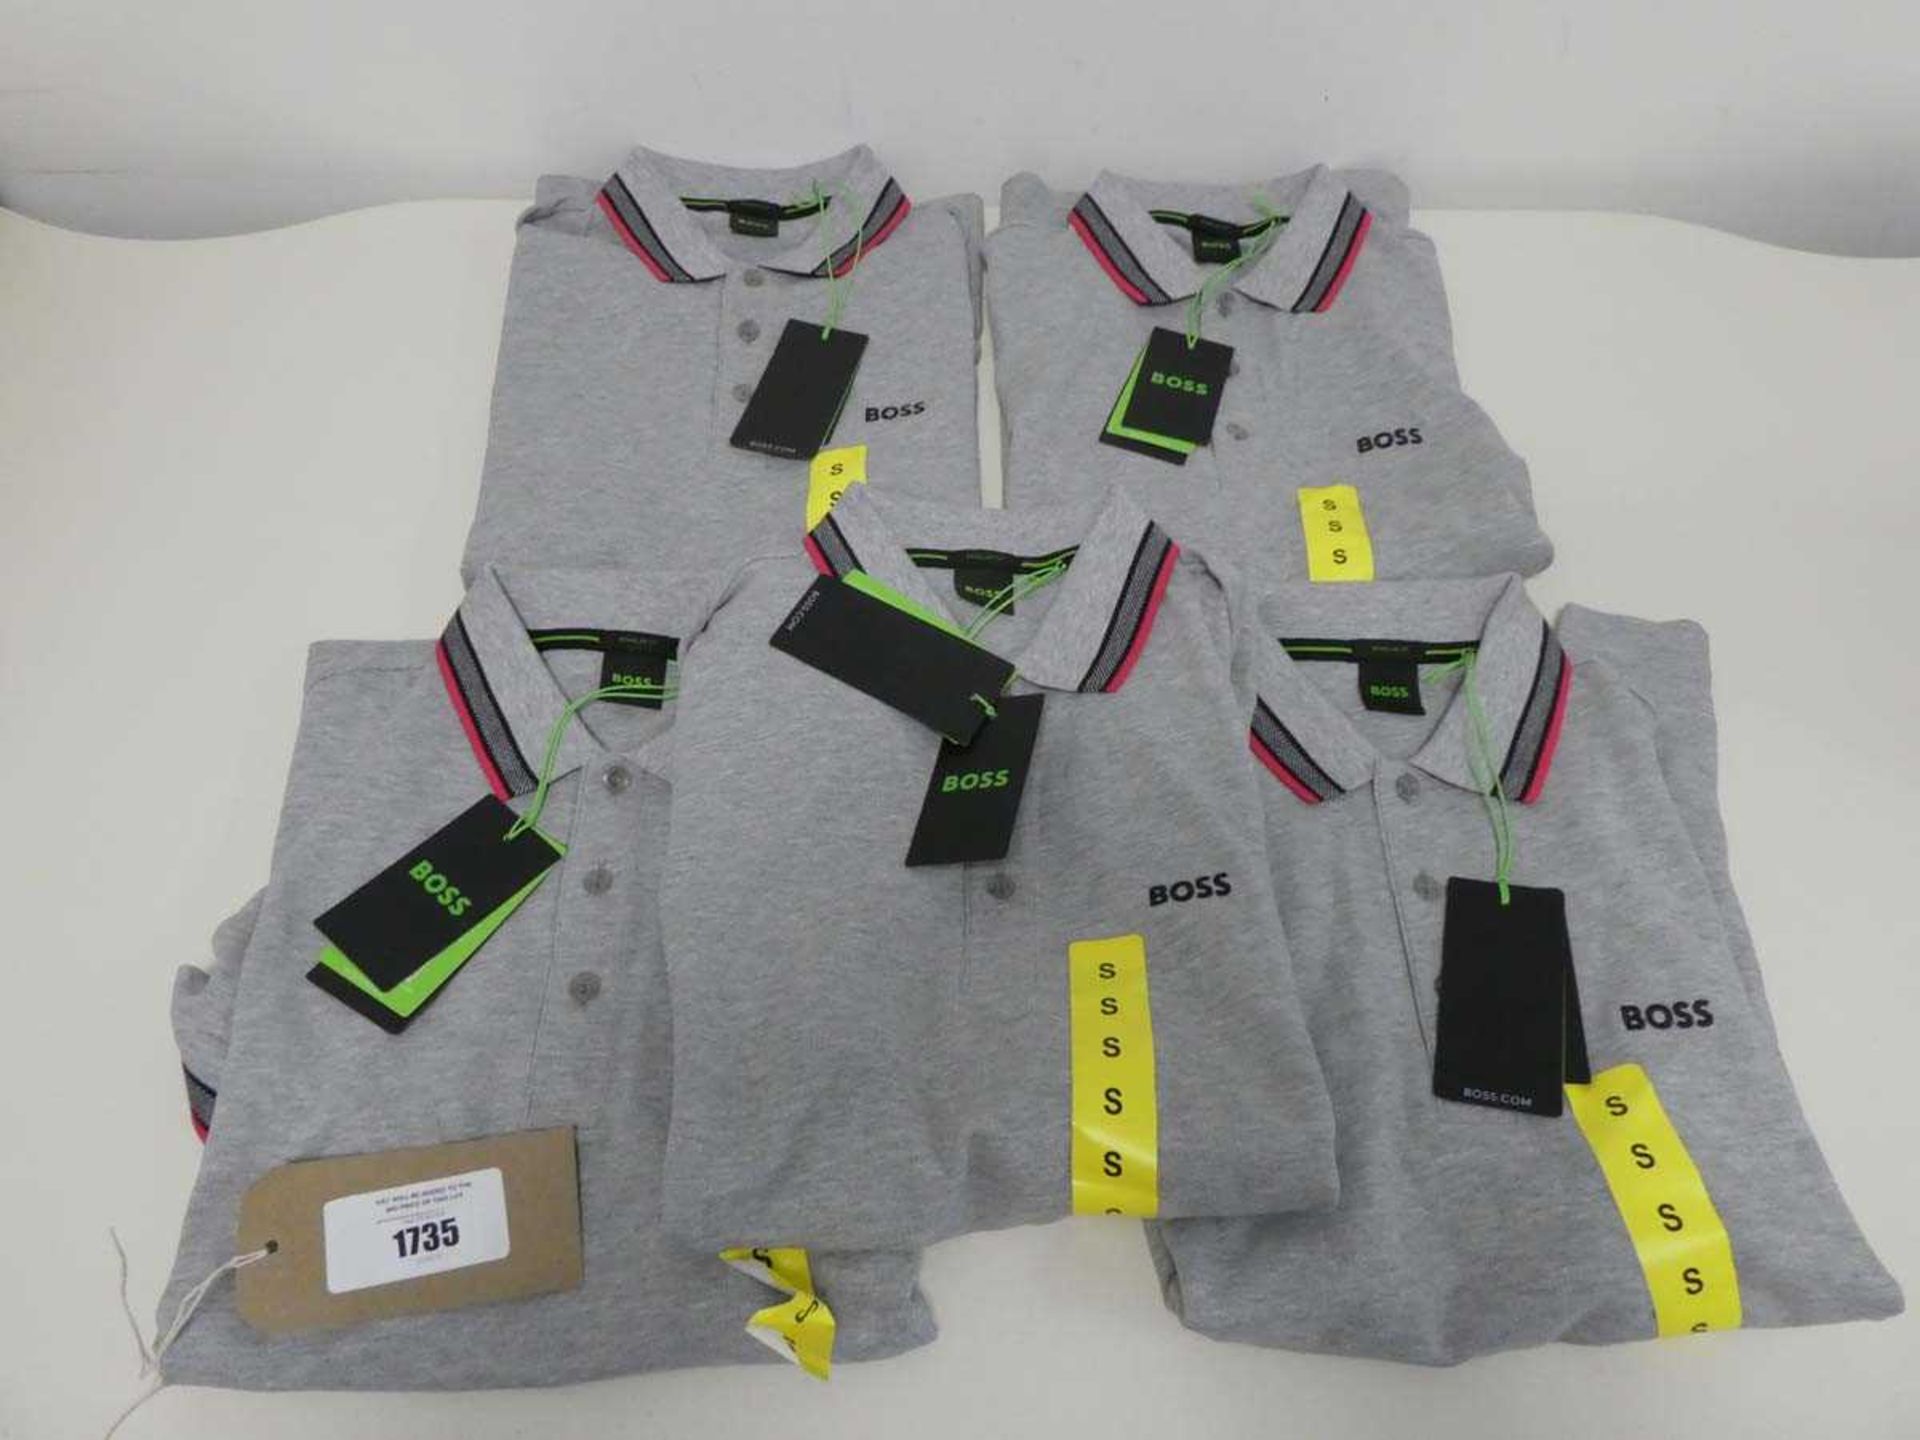 +VAT 5 Hugo Boss polo shirts in grey (all size small)